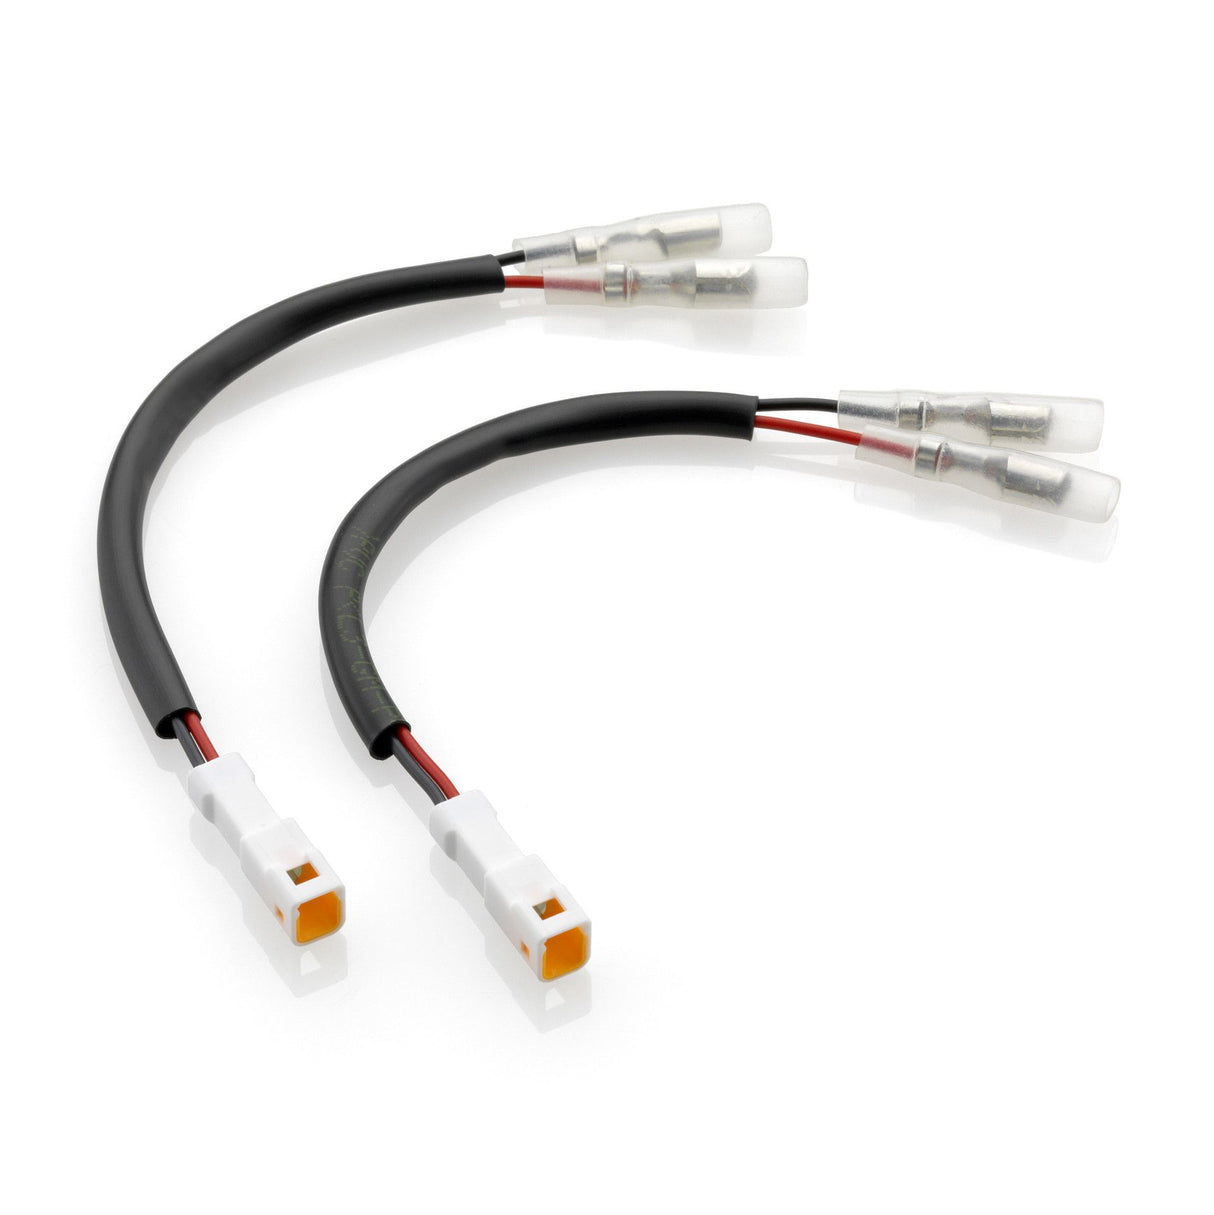 Rizoma BS306 Cable Kit (Turn Signal Wiring Kit For Rizoma License Plate Support) EE137H